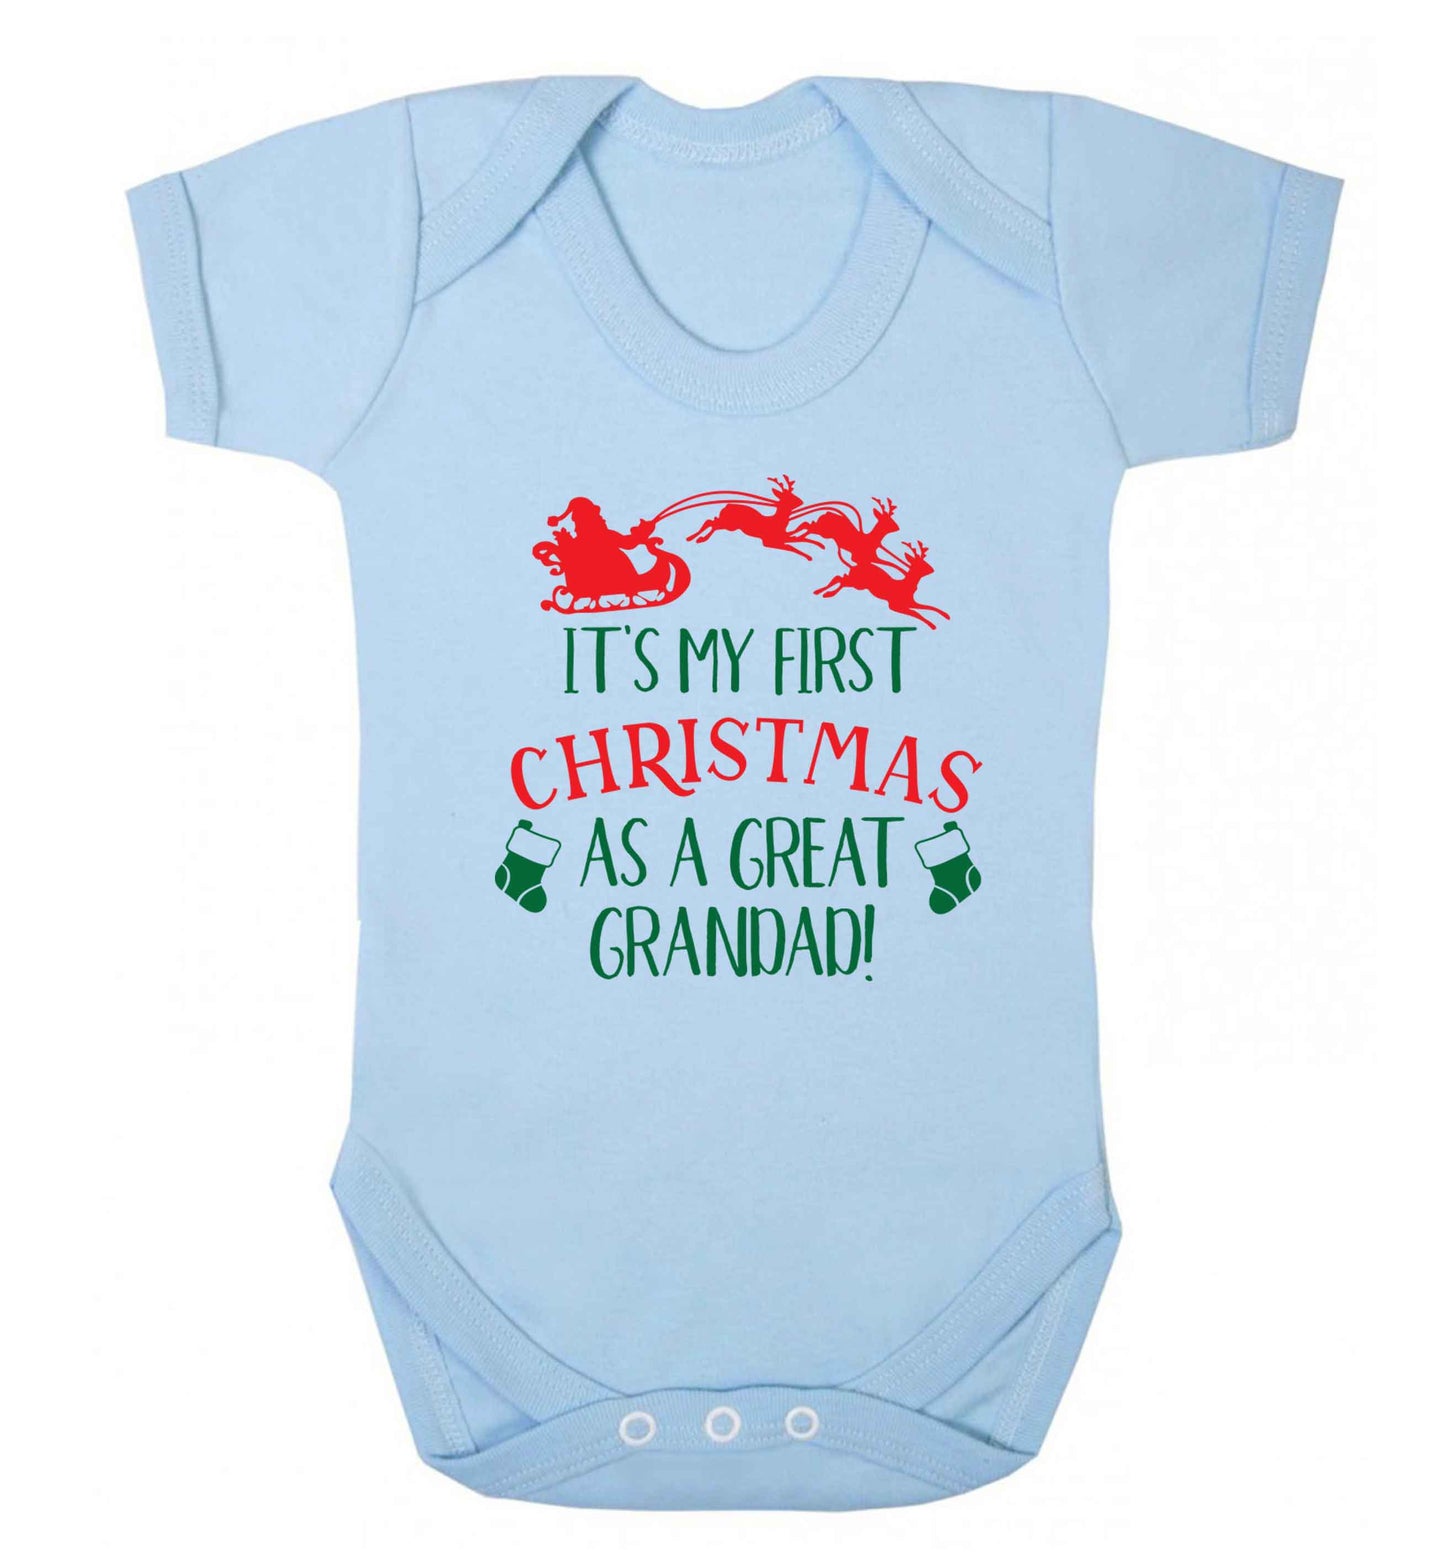 It's my first Christmas as a great grandad! Baby Vest pale blue 18-24 months